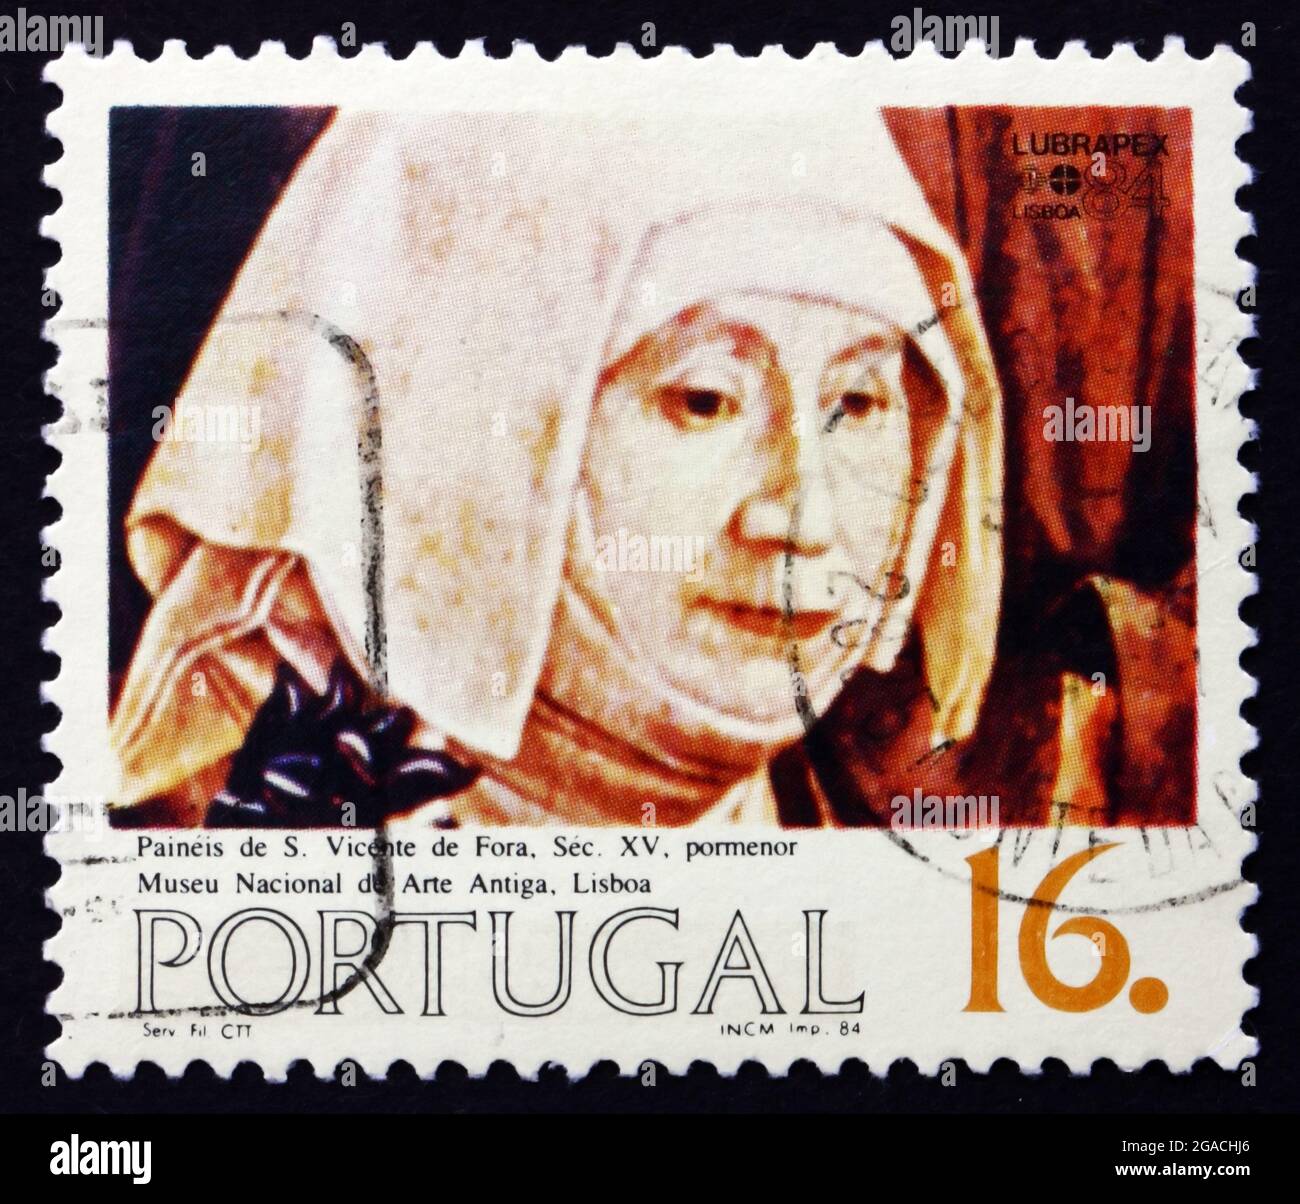 PORTUGAL - CIRCA 1984: a stamp printed in the Portugal shows Nun ...